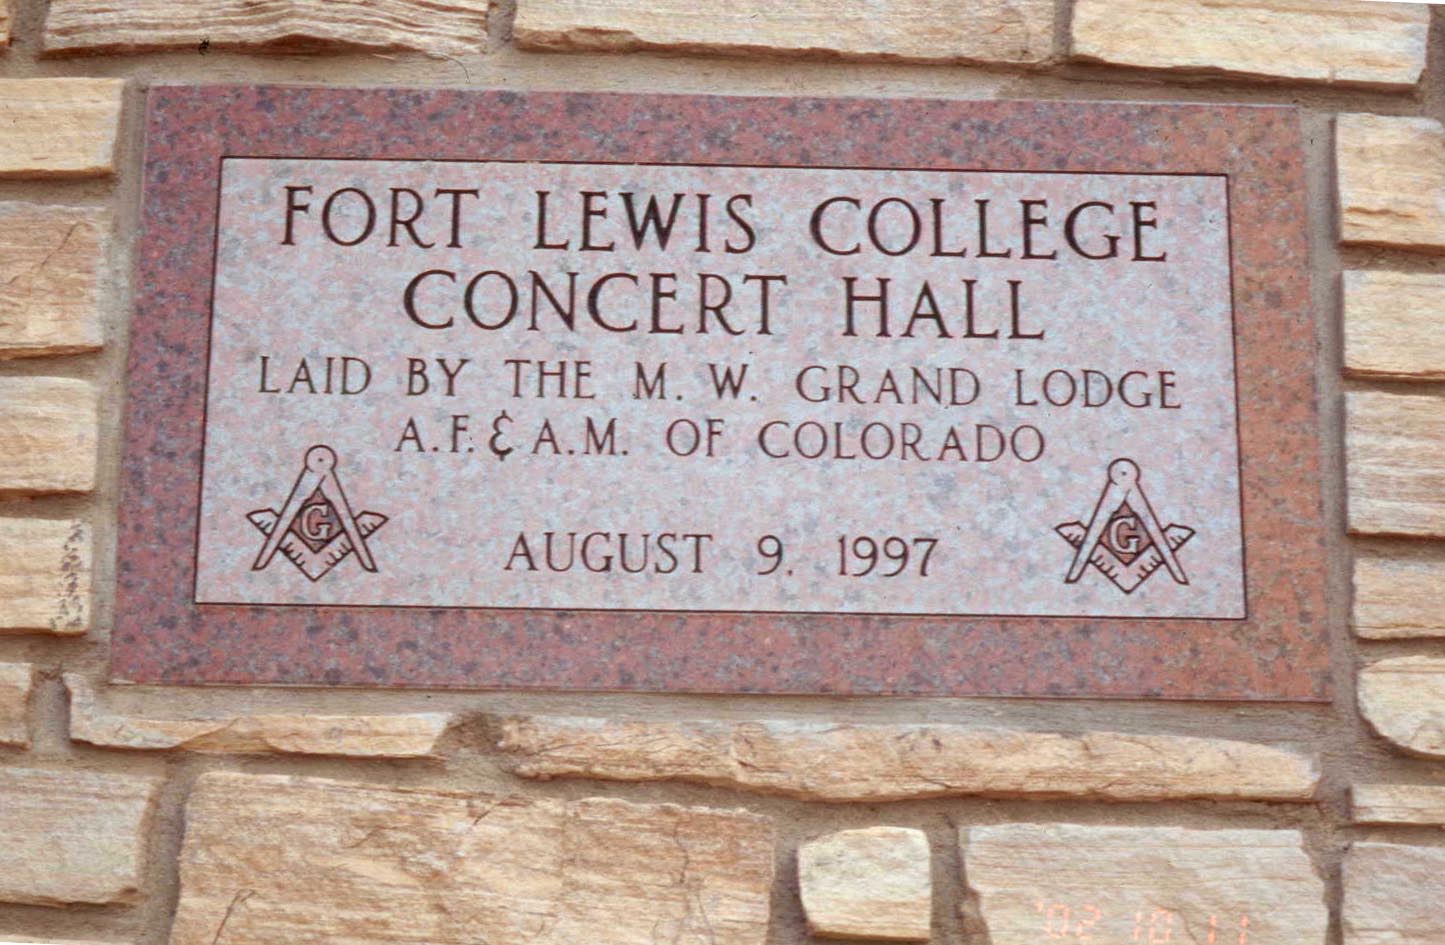 Access images of historical markers on the Fort Lewis College campus